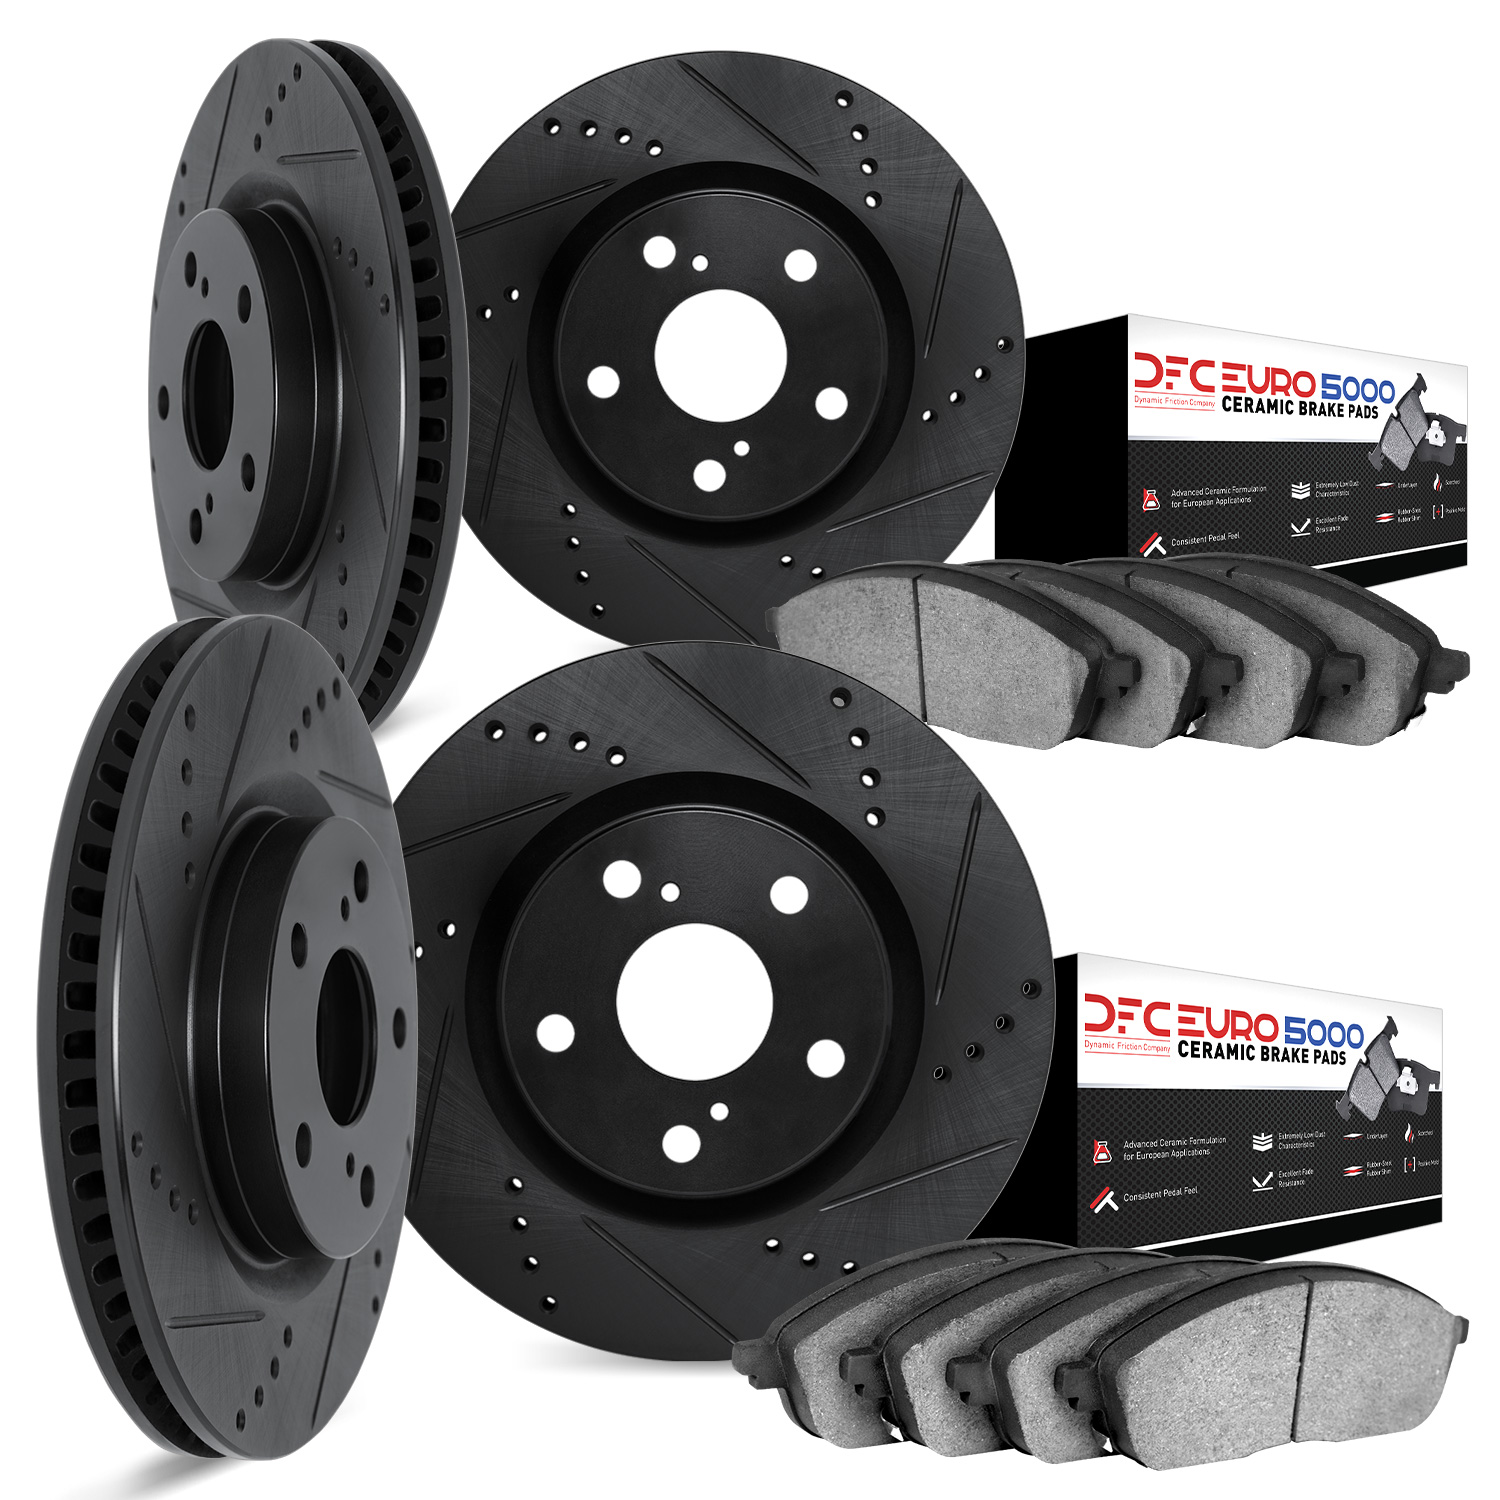 8604-31015 Drilled/Slotted Brake Rotors w/5000 Euro Ceramic Brake Pads Kit [Black], 1996-2003 BMW, Position: Front and Rear